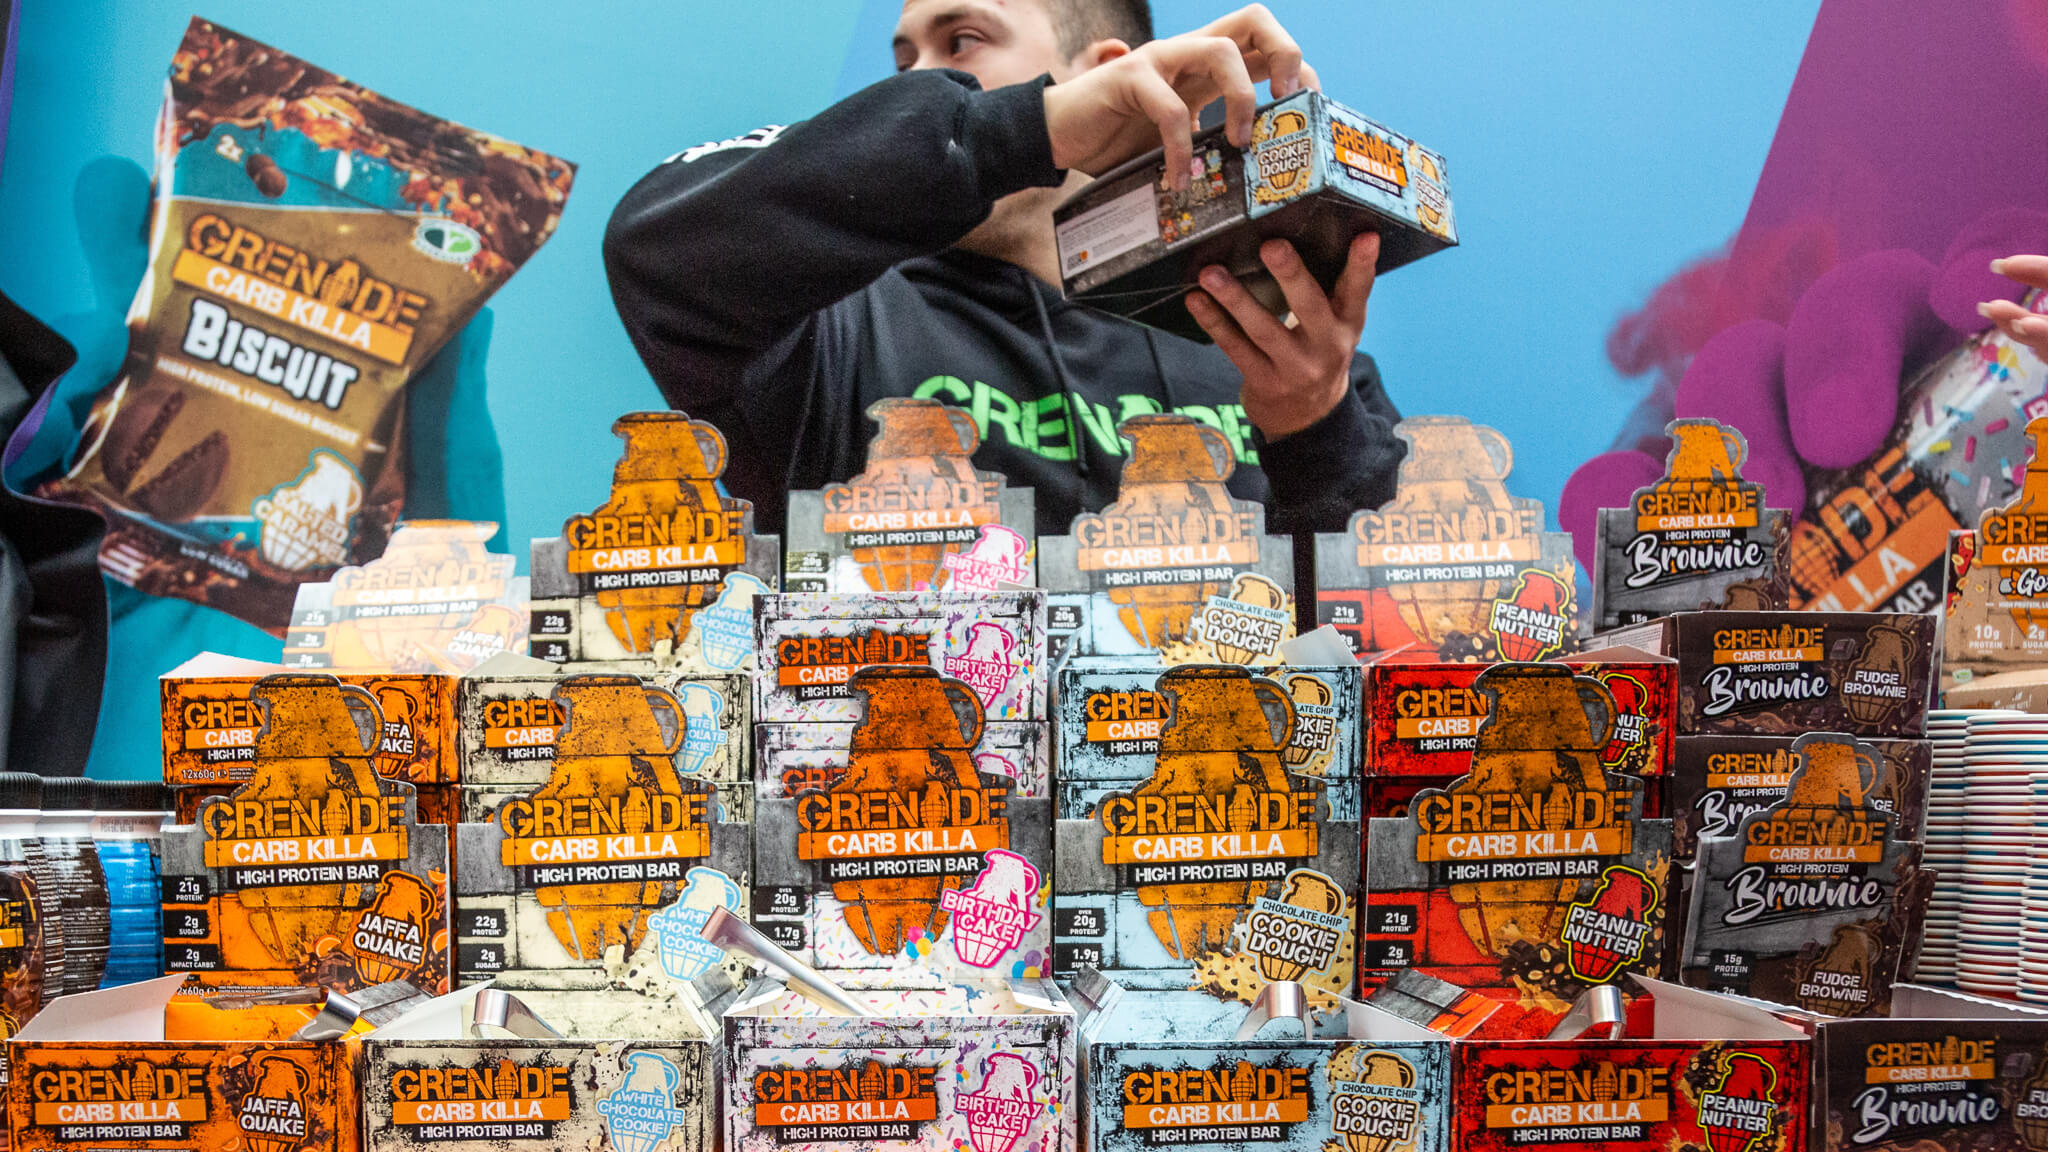 Grenade Snacking Revolution flavour not fads